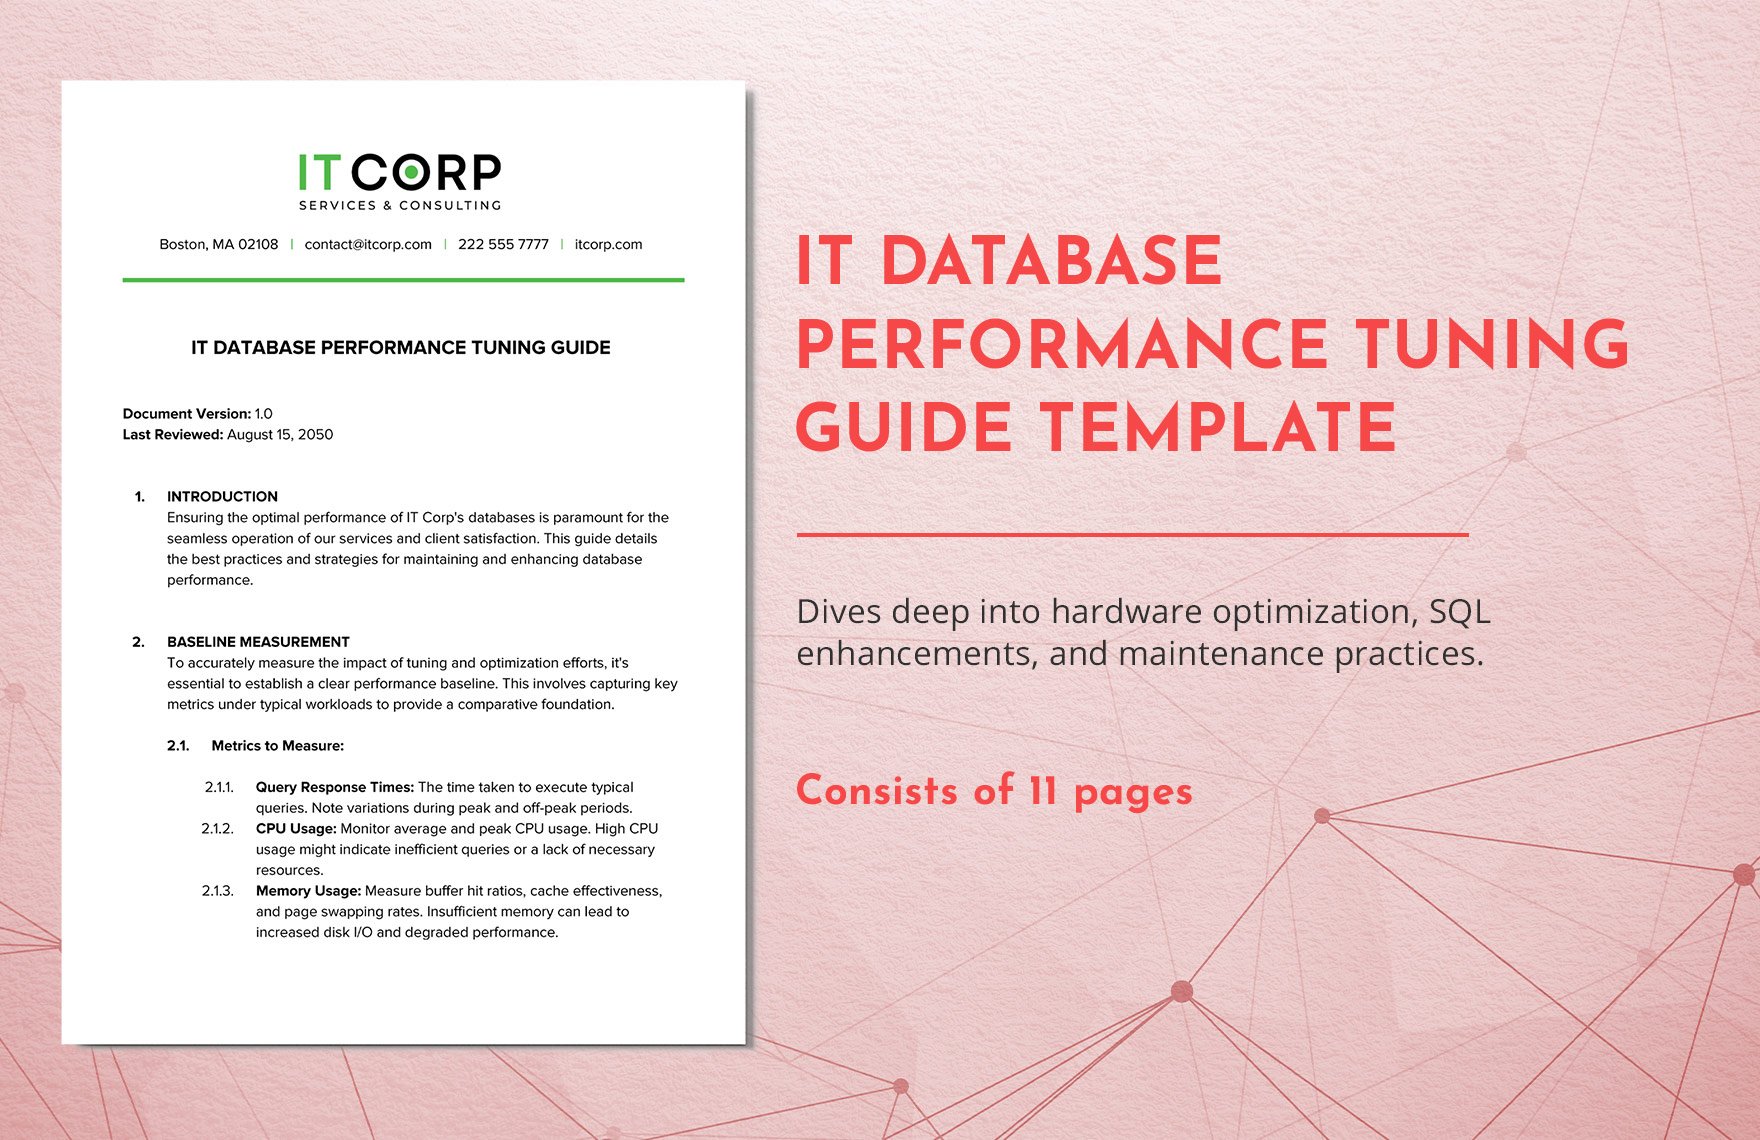 IT Database Performance Tuning Guide Template